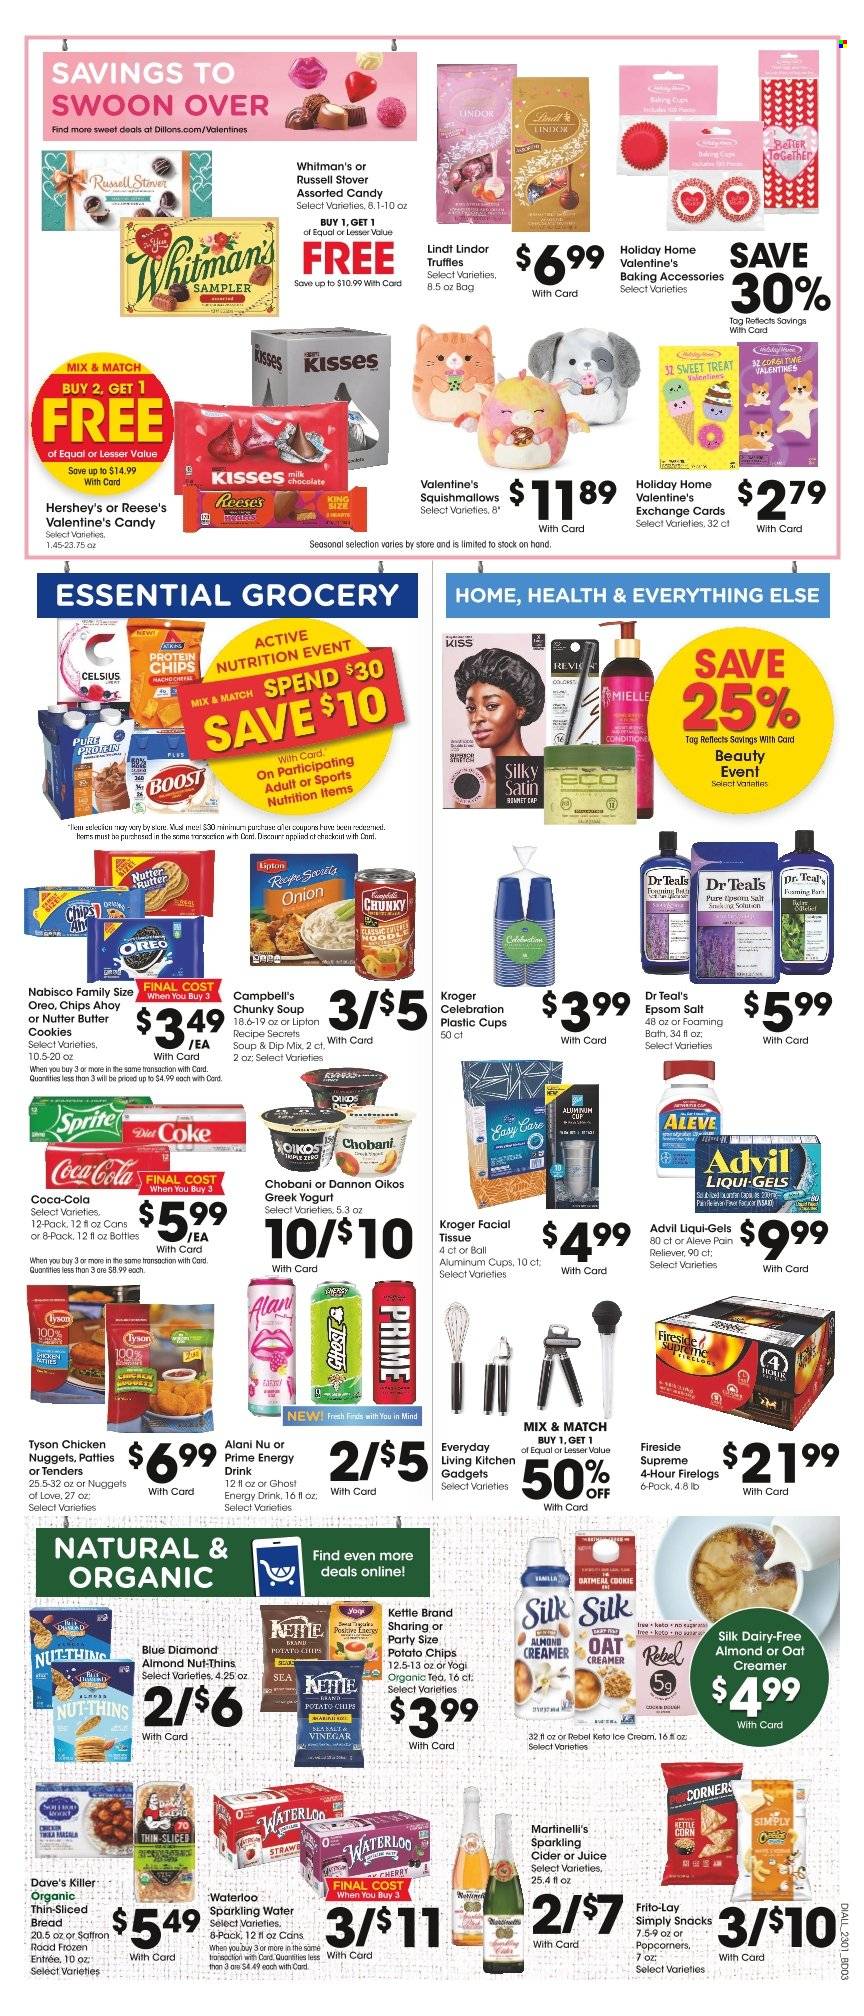 thumbnail - Dillons Flyer - 02/01/2023 - 02/07/2023 - Sales products - bread, cherries, Campbell's, soup, nuggets, chicken nuggets, noodles, Tikka Masala, cheese, greek yoghurt, Oreo, yoghurt, Oikos, Chobani, Dannon, Silk, creamer, almond creamer, ice cream, Reese's, Hershey's, Enlightened lce Cream, cookies, butter cookies, snack, Lindt, Lindor, truffles, Celebration, potato chips, Thins, popcorn, Frito-Lay, Blue Diamond, Coca-Cola, Sprite, juice, energy drink, Lipton, Diet Coke, sparkling water, Boost, tea, sparkling cider, sparkling wine, cider, tissues, Mielle, baking accessories, cup, Squishmallows, Aleve, Advil Rapid. Page 5.